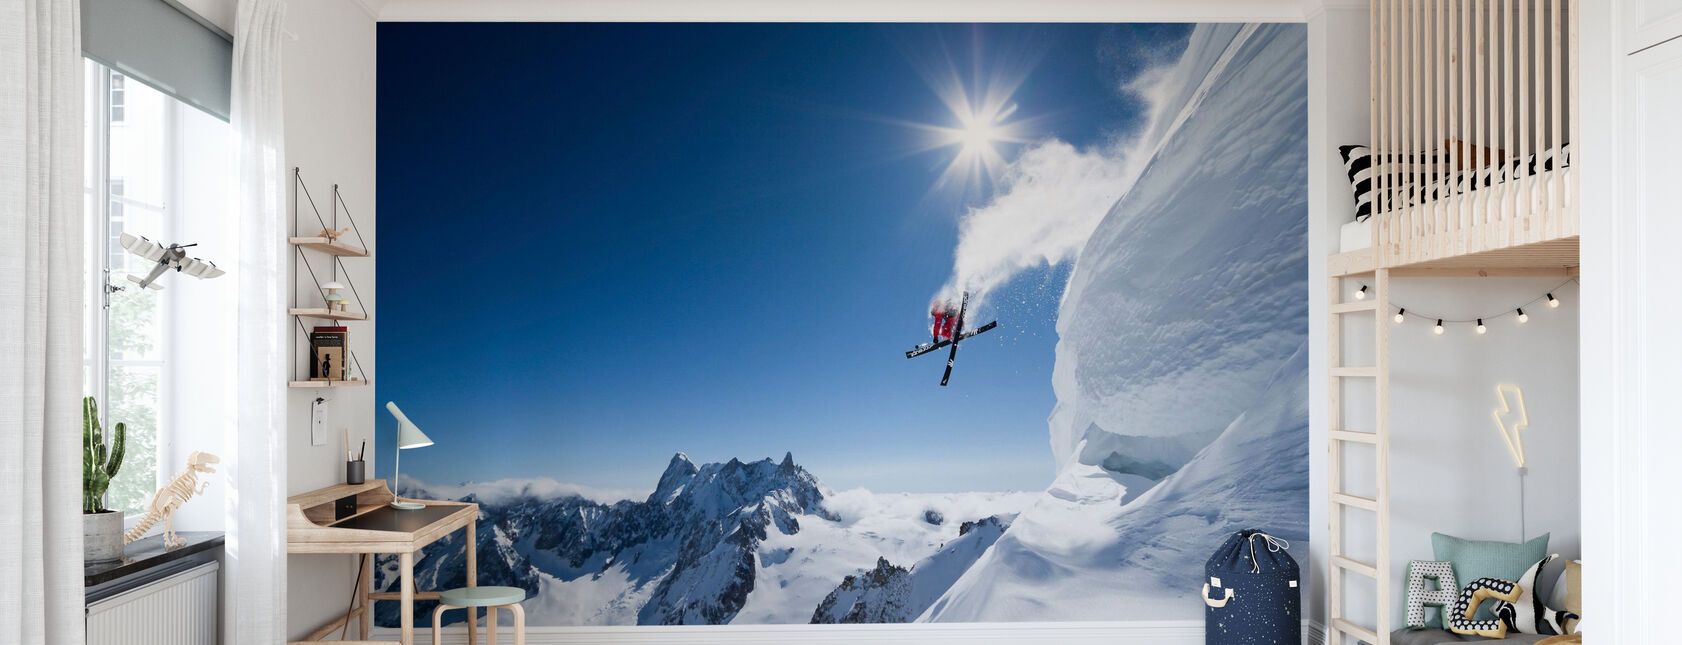 Extreme Skiing - Wallpaper - Kids Room